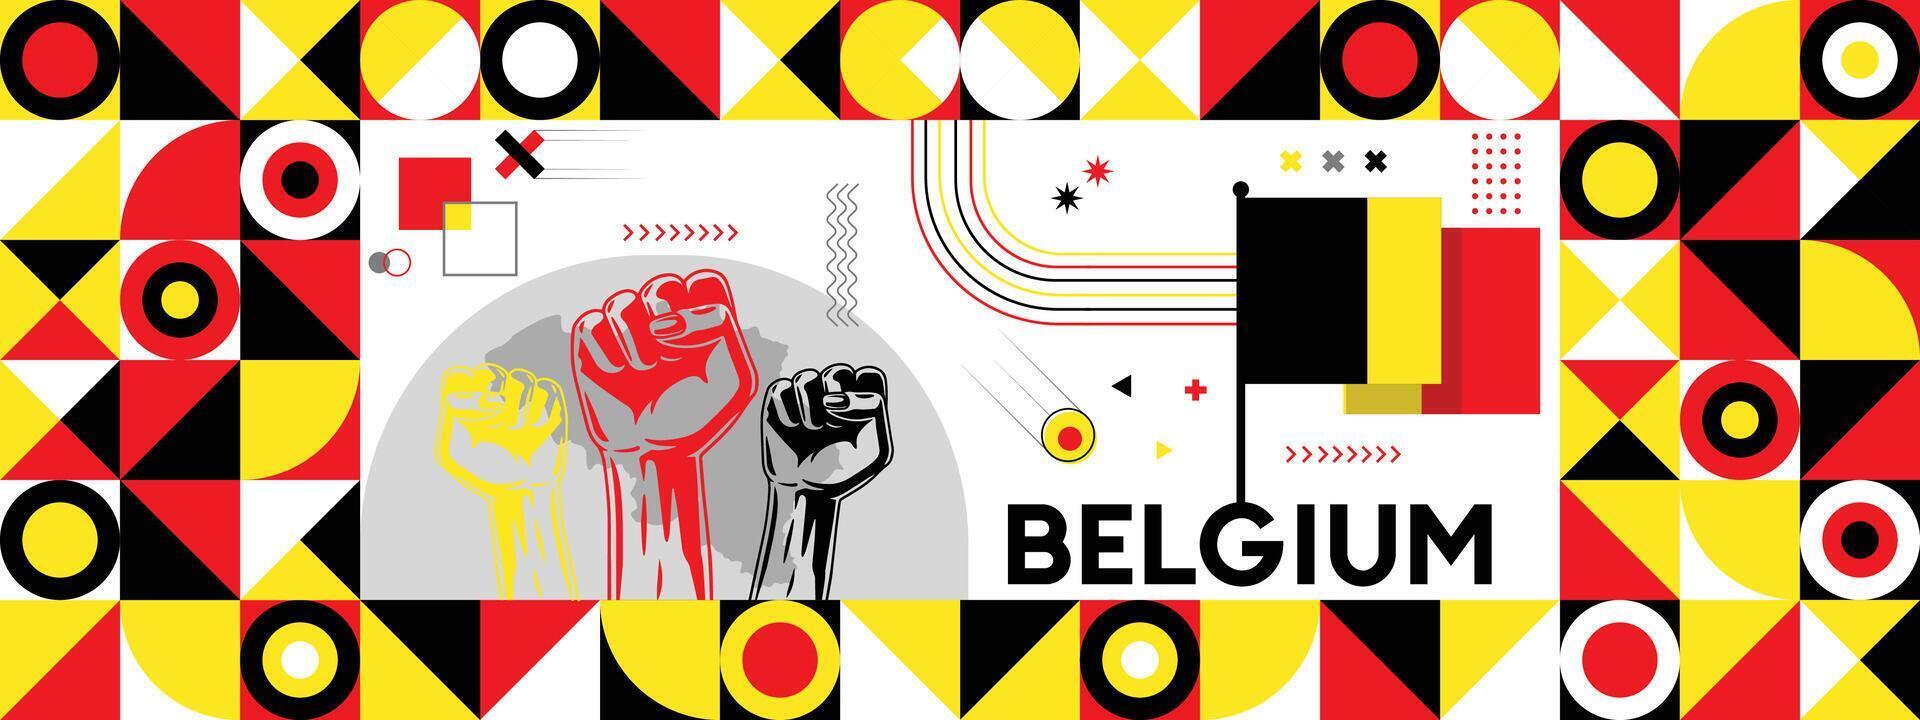 Belgium national or independence day banner for country celebration. Flag and map of Belgium with raised fists. Modern retro design with typorgaphy abstract geometric icons. vector